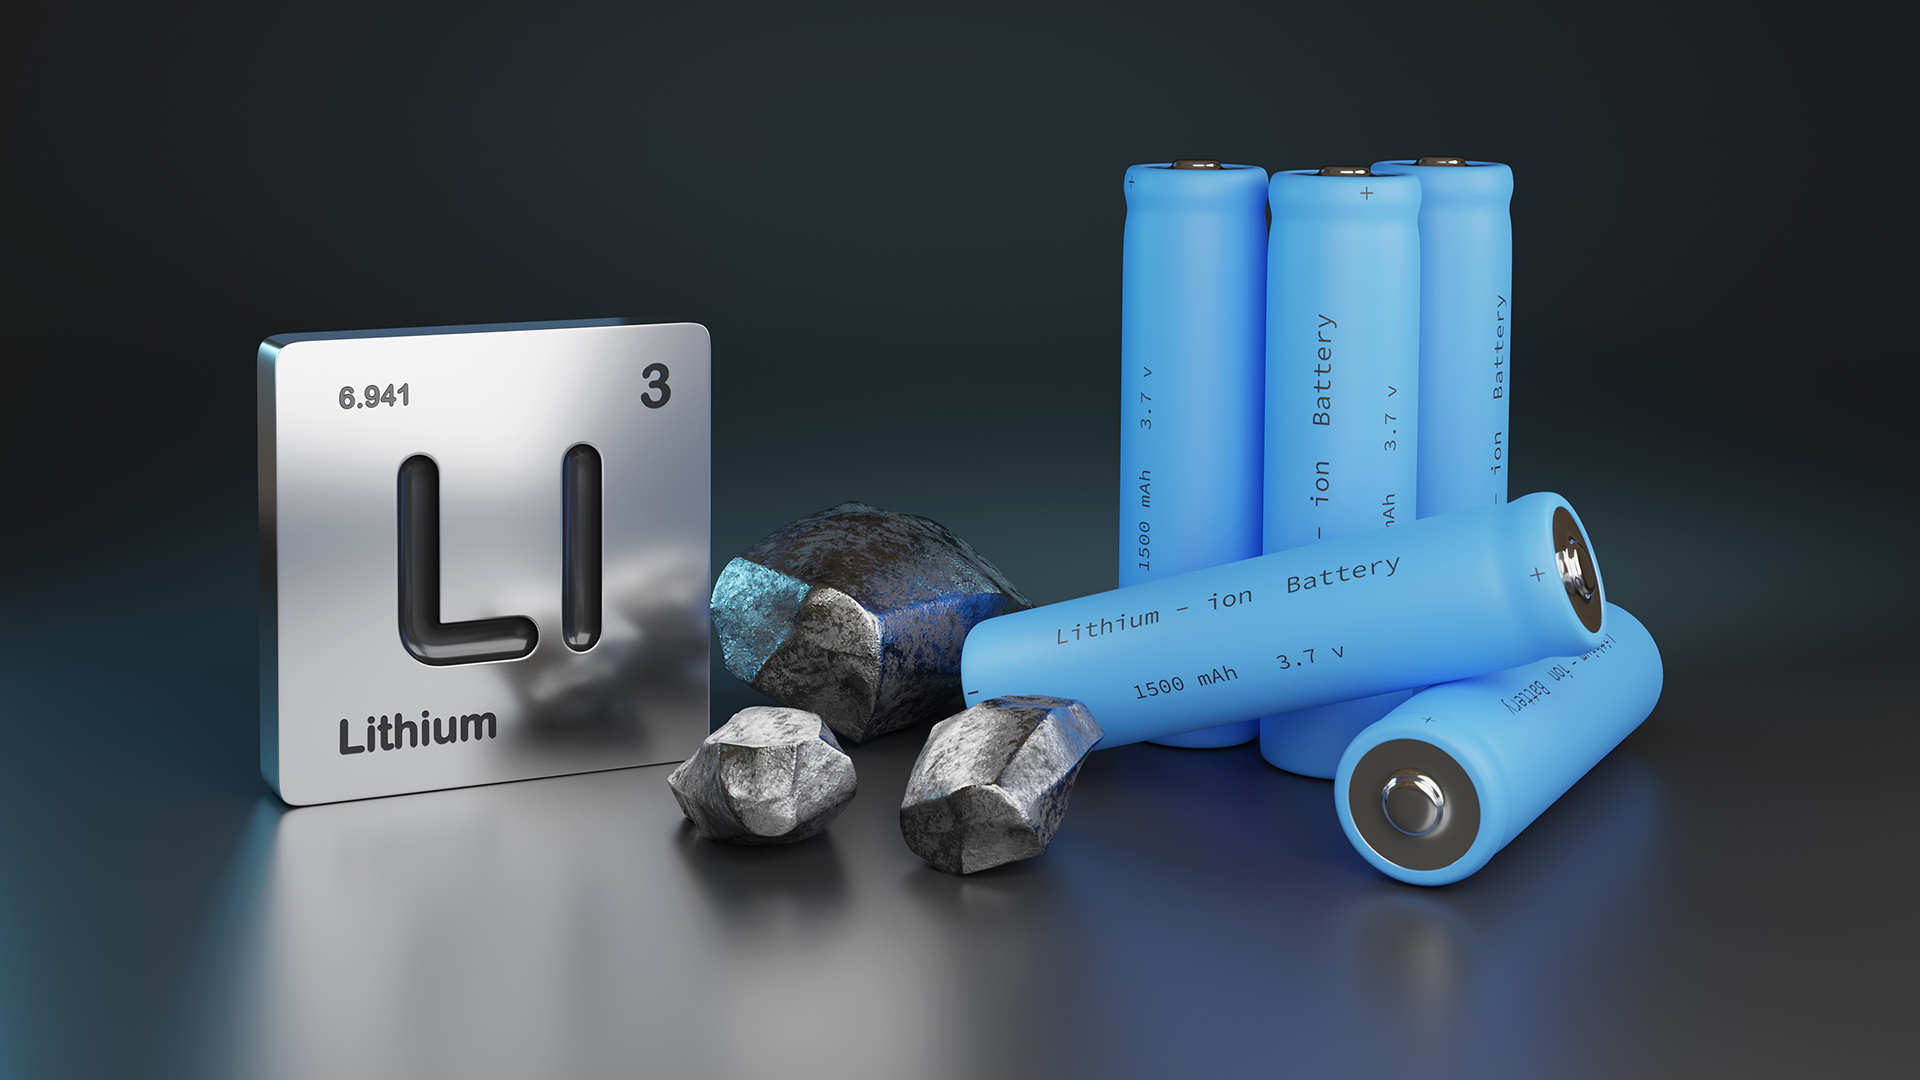 What is lithium used for, and where does it come from?